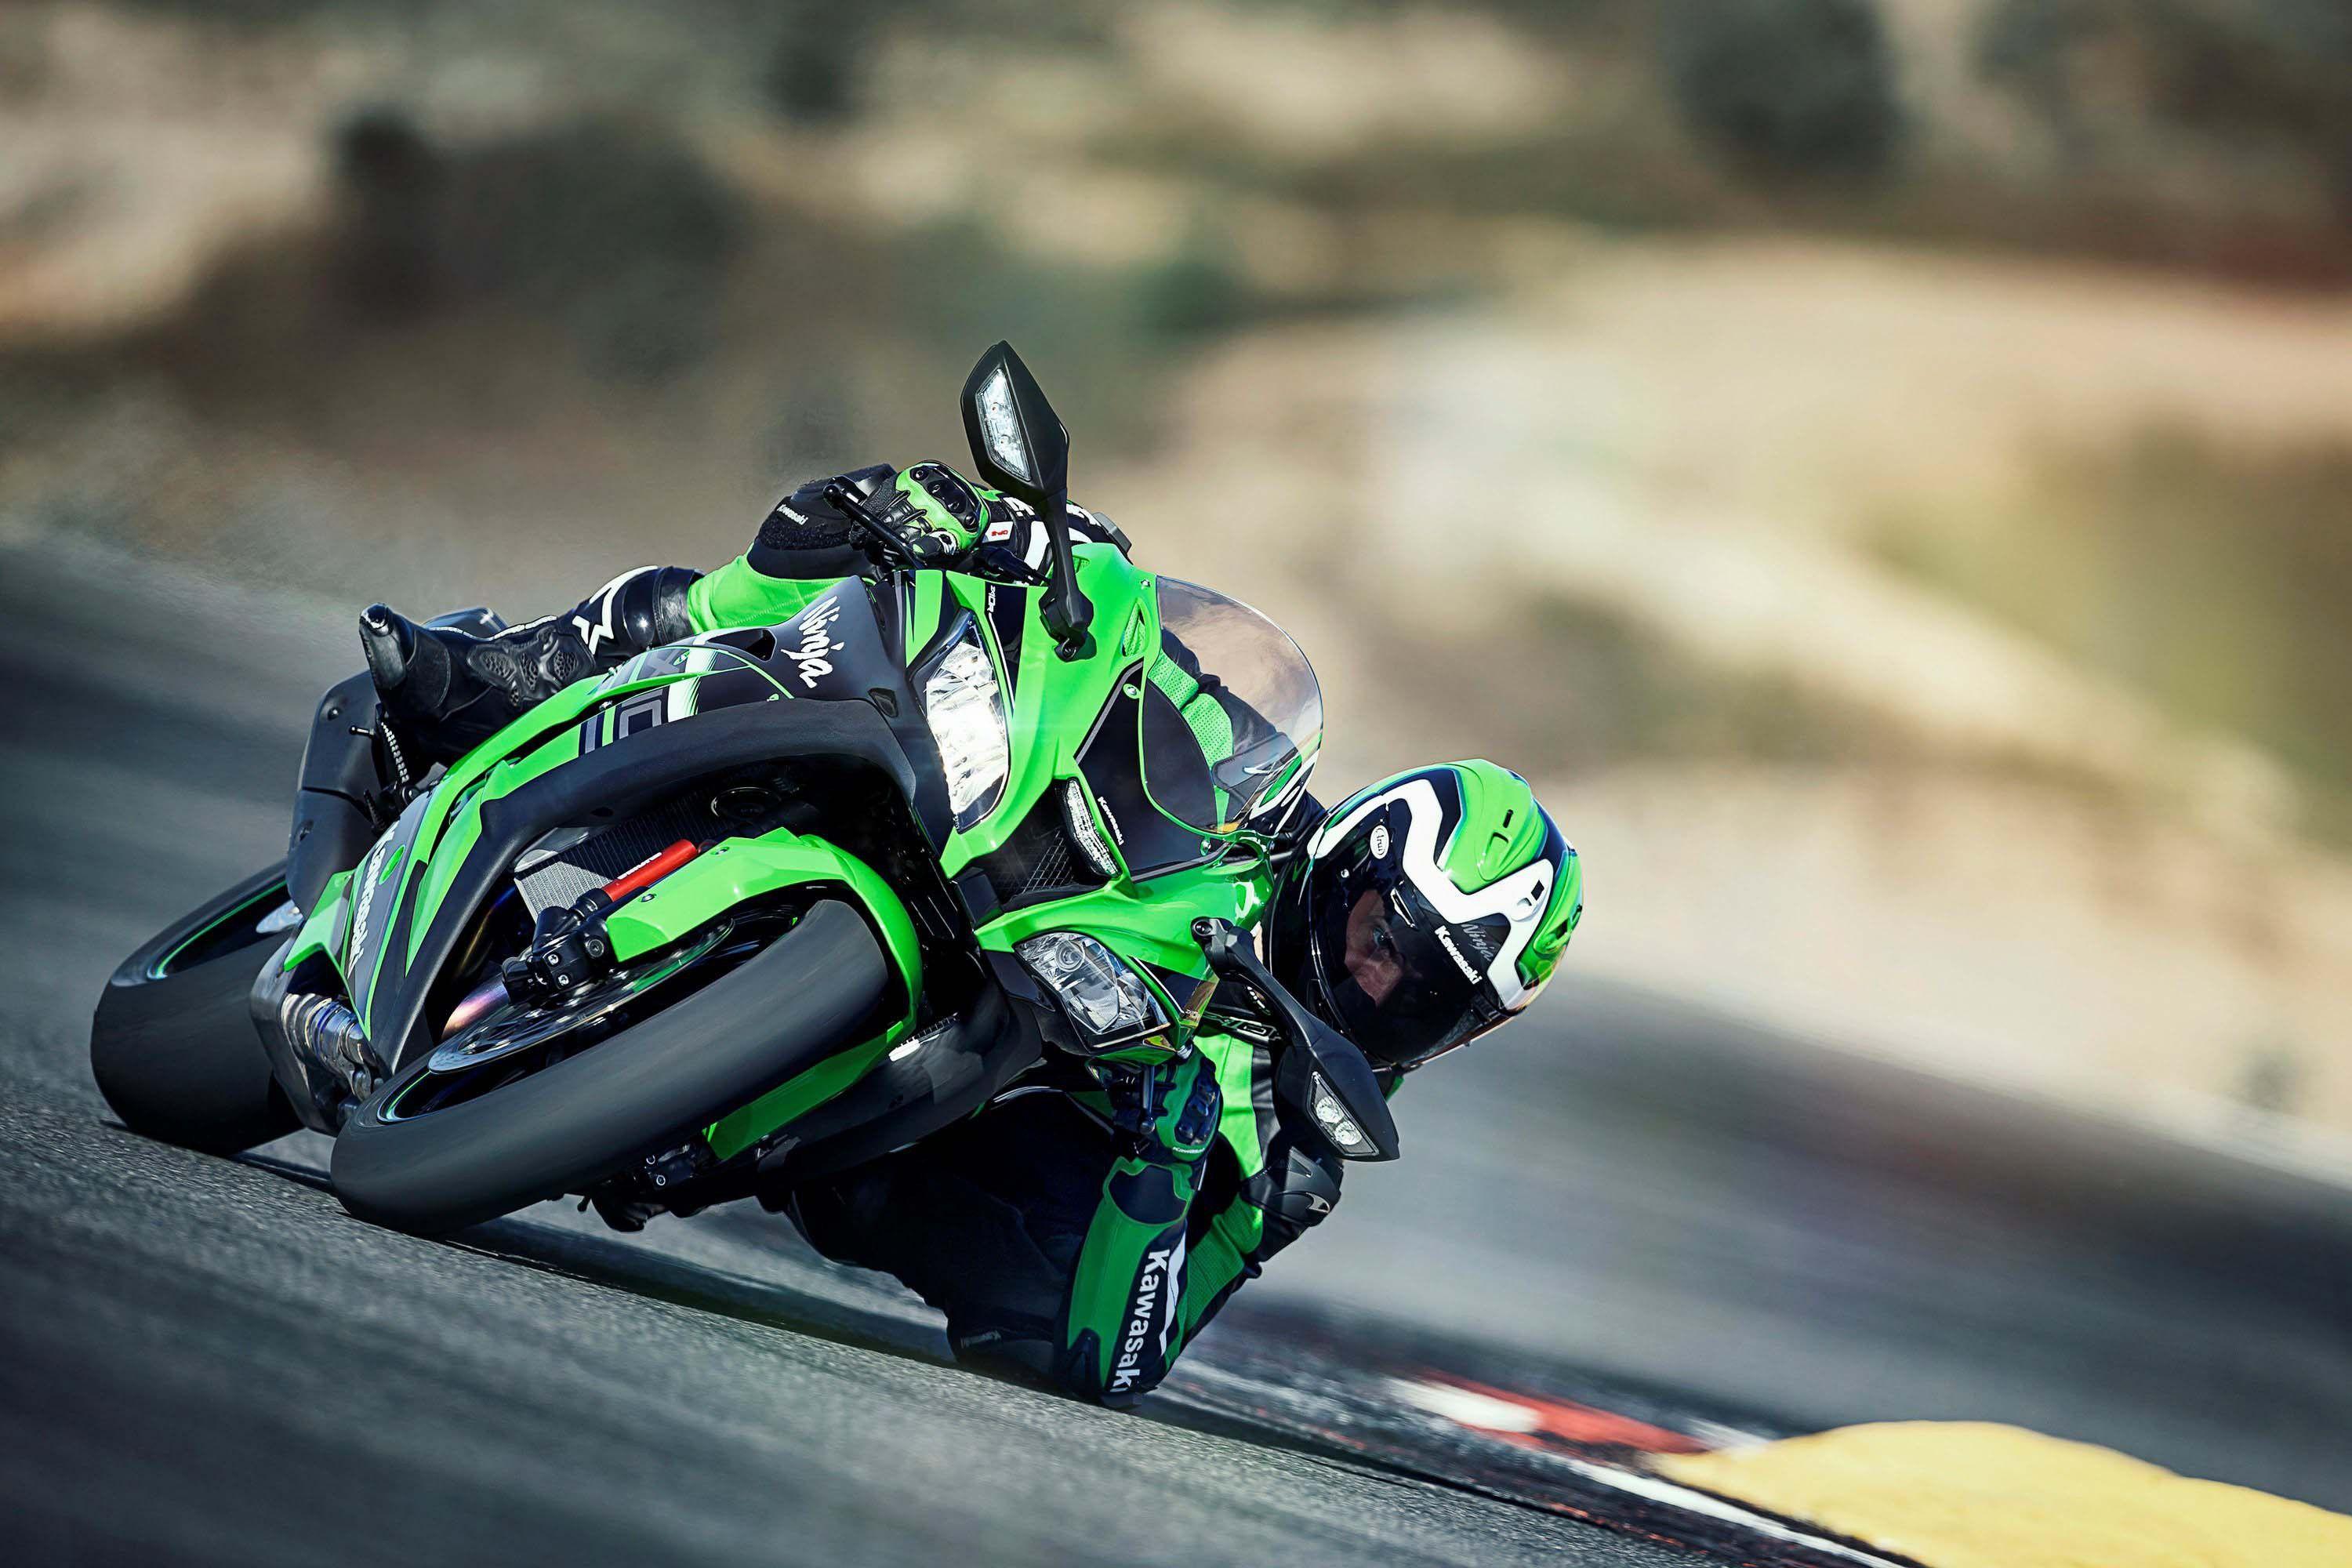 Zx 10r Archives & Rubber